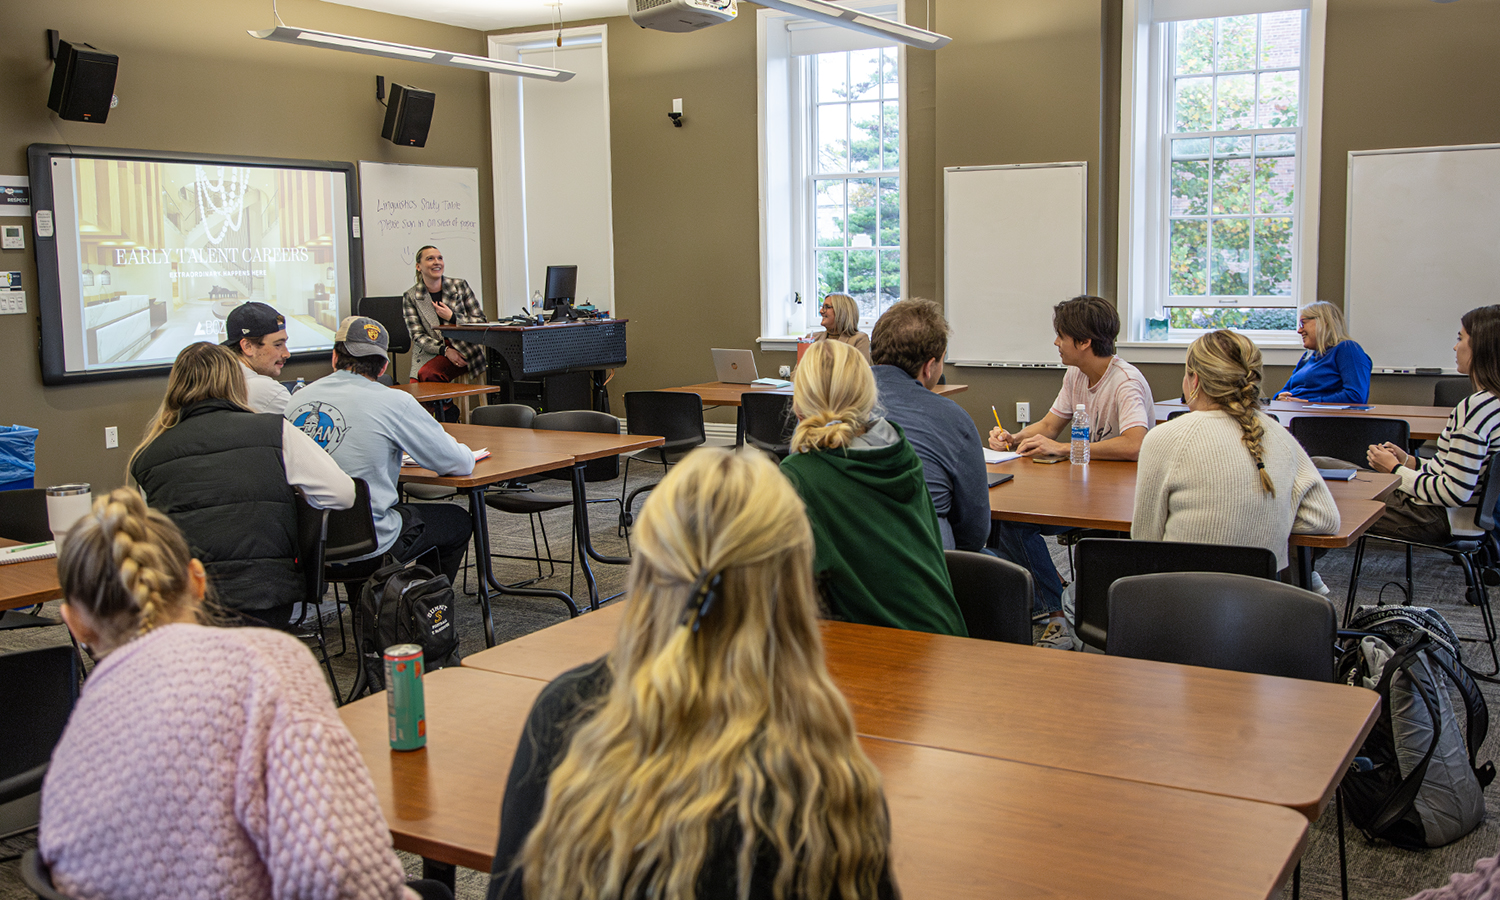 During a Career Services event, Abby Goodrich ’18, who is an Assistant General Manager for the Bozzuto Group, speaks to students about internship and job opportunities.